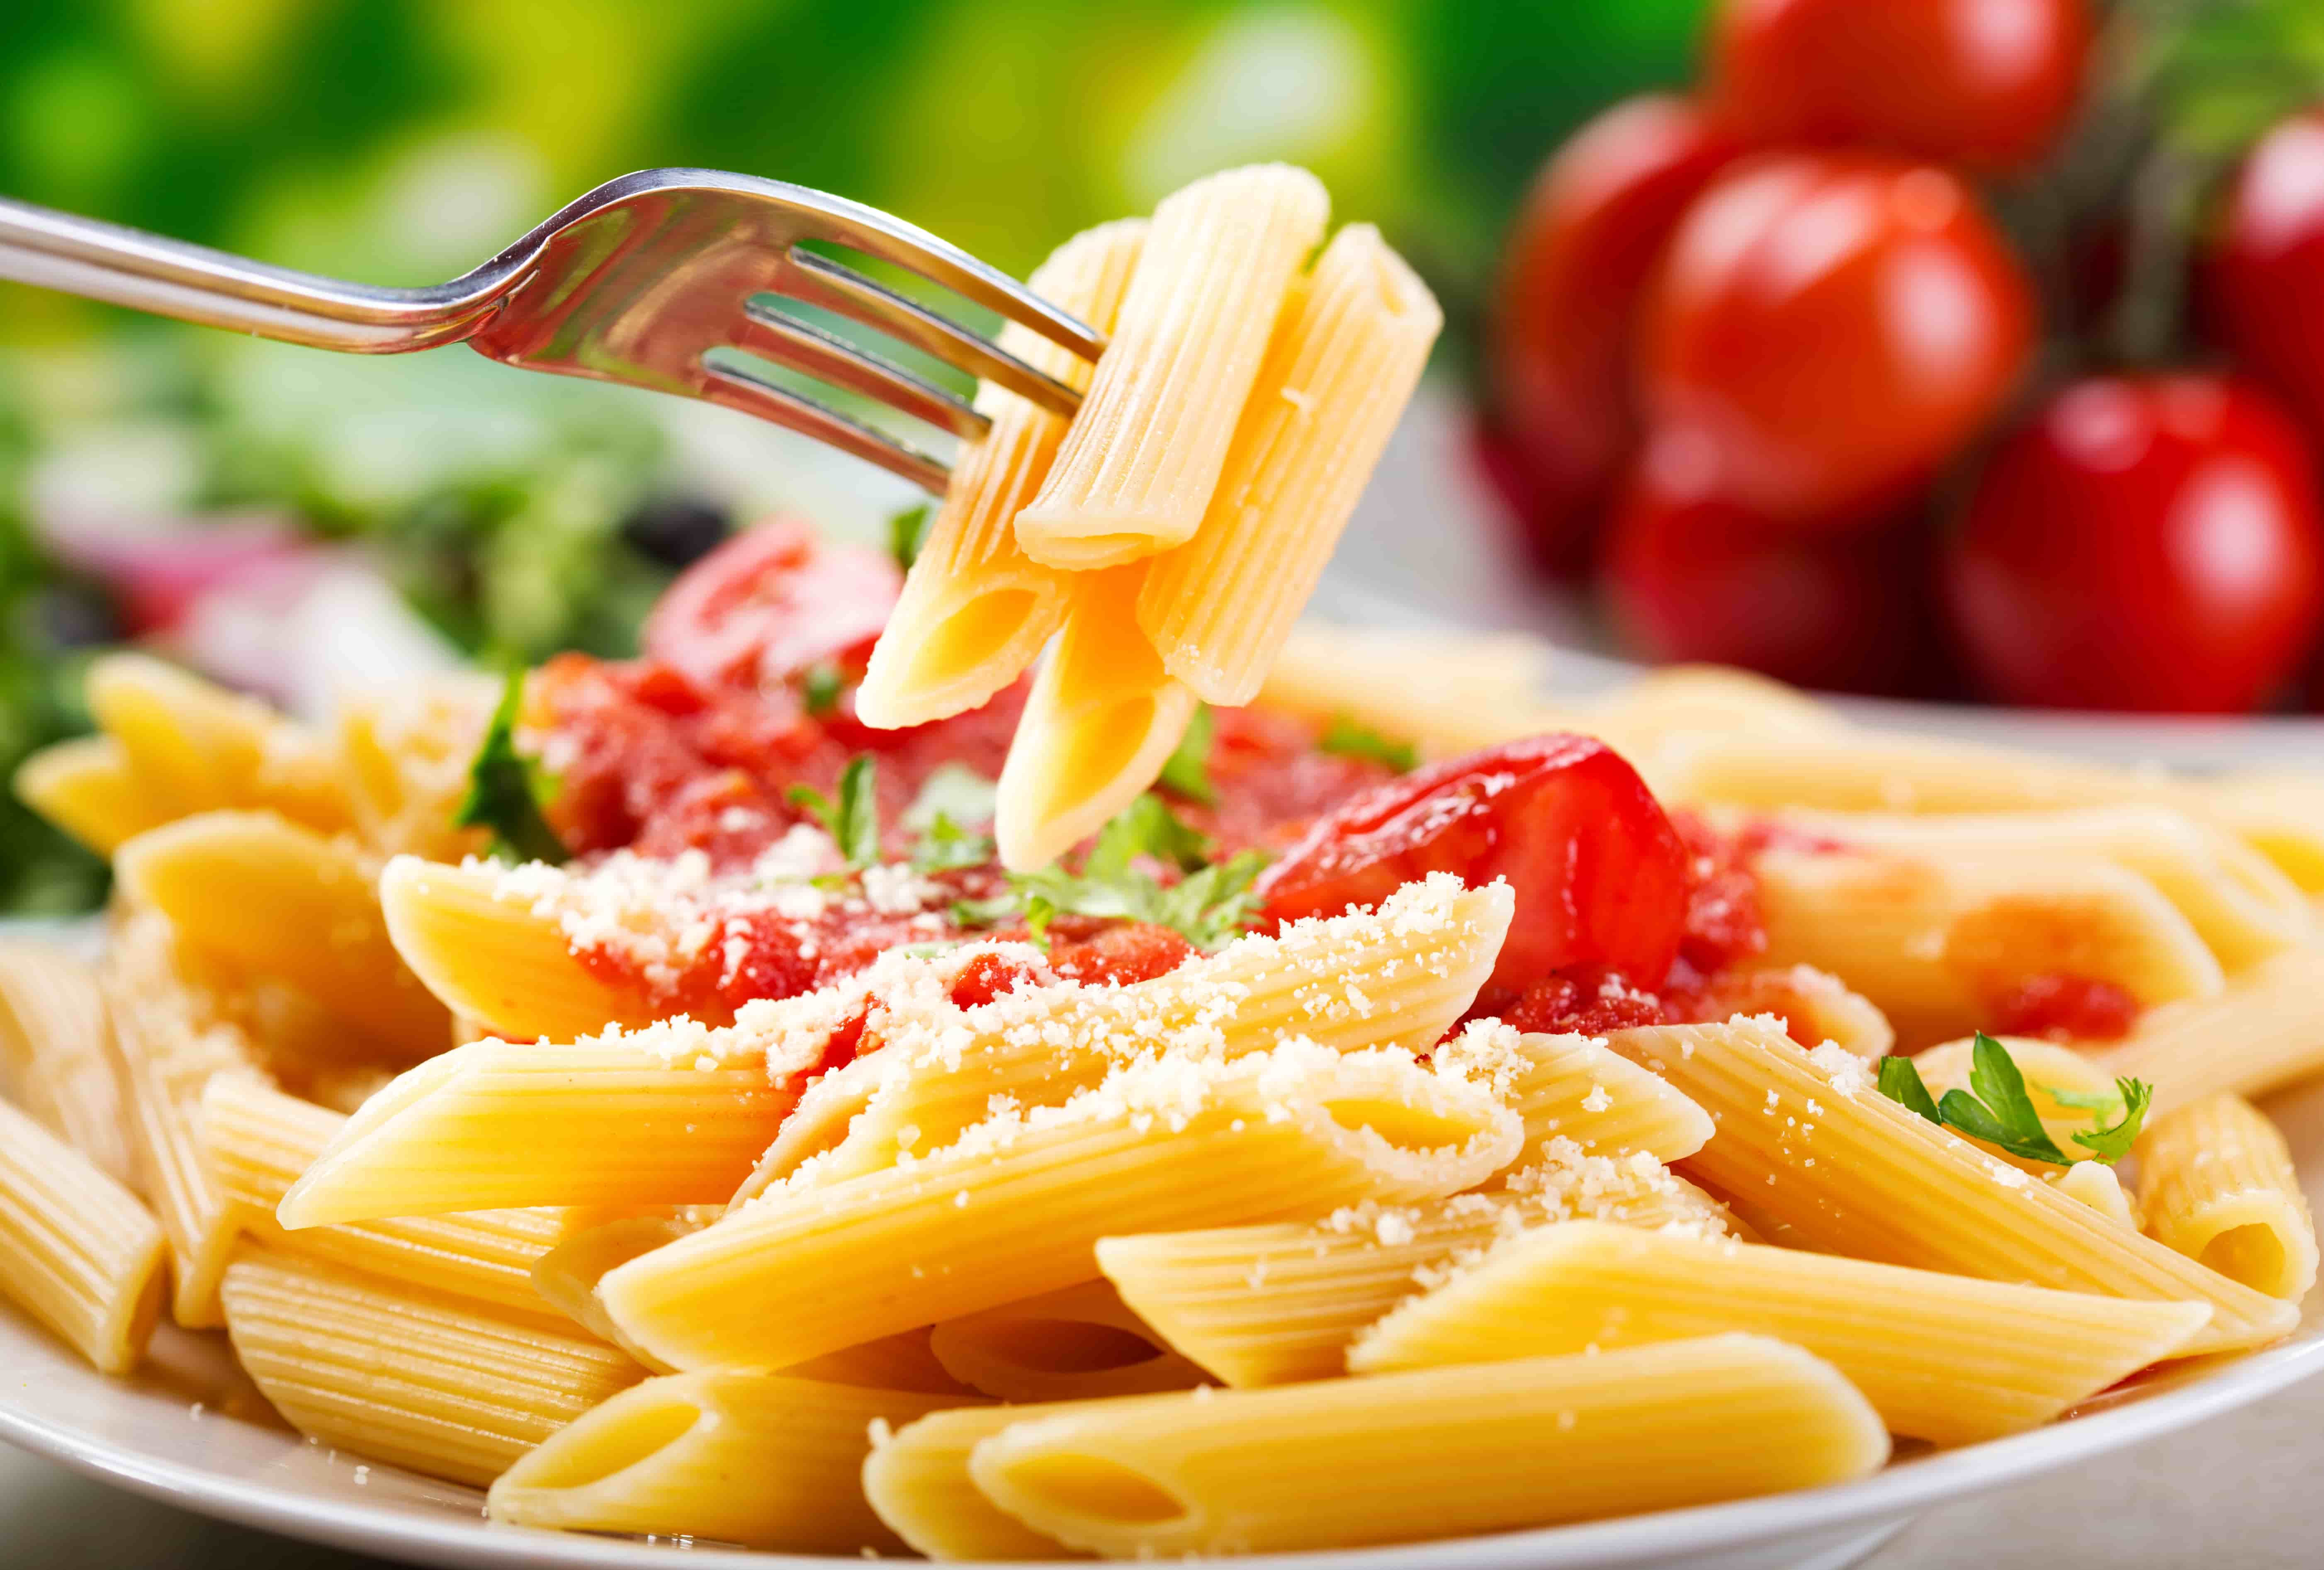 Open Invitation for Distributors, Importers and Retailers to Italian Food B2B Marketplace